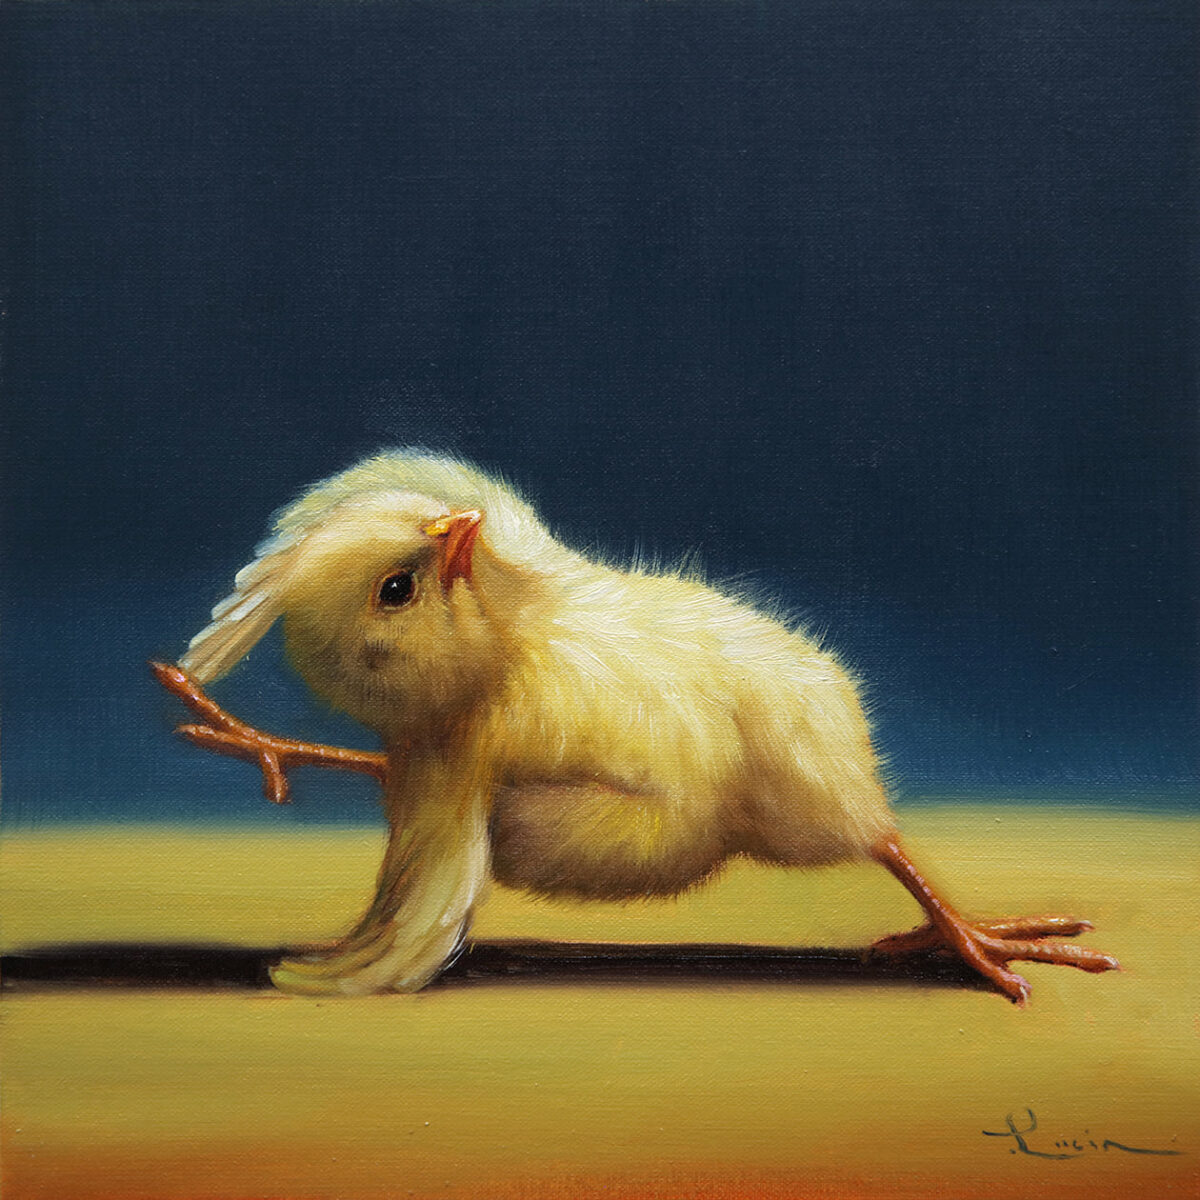 Lovely Paintings Of A Little Chicken Making Yoga Poses By Lucia Heffernan 8